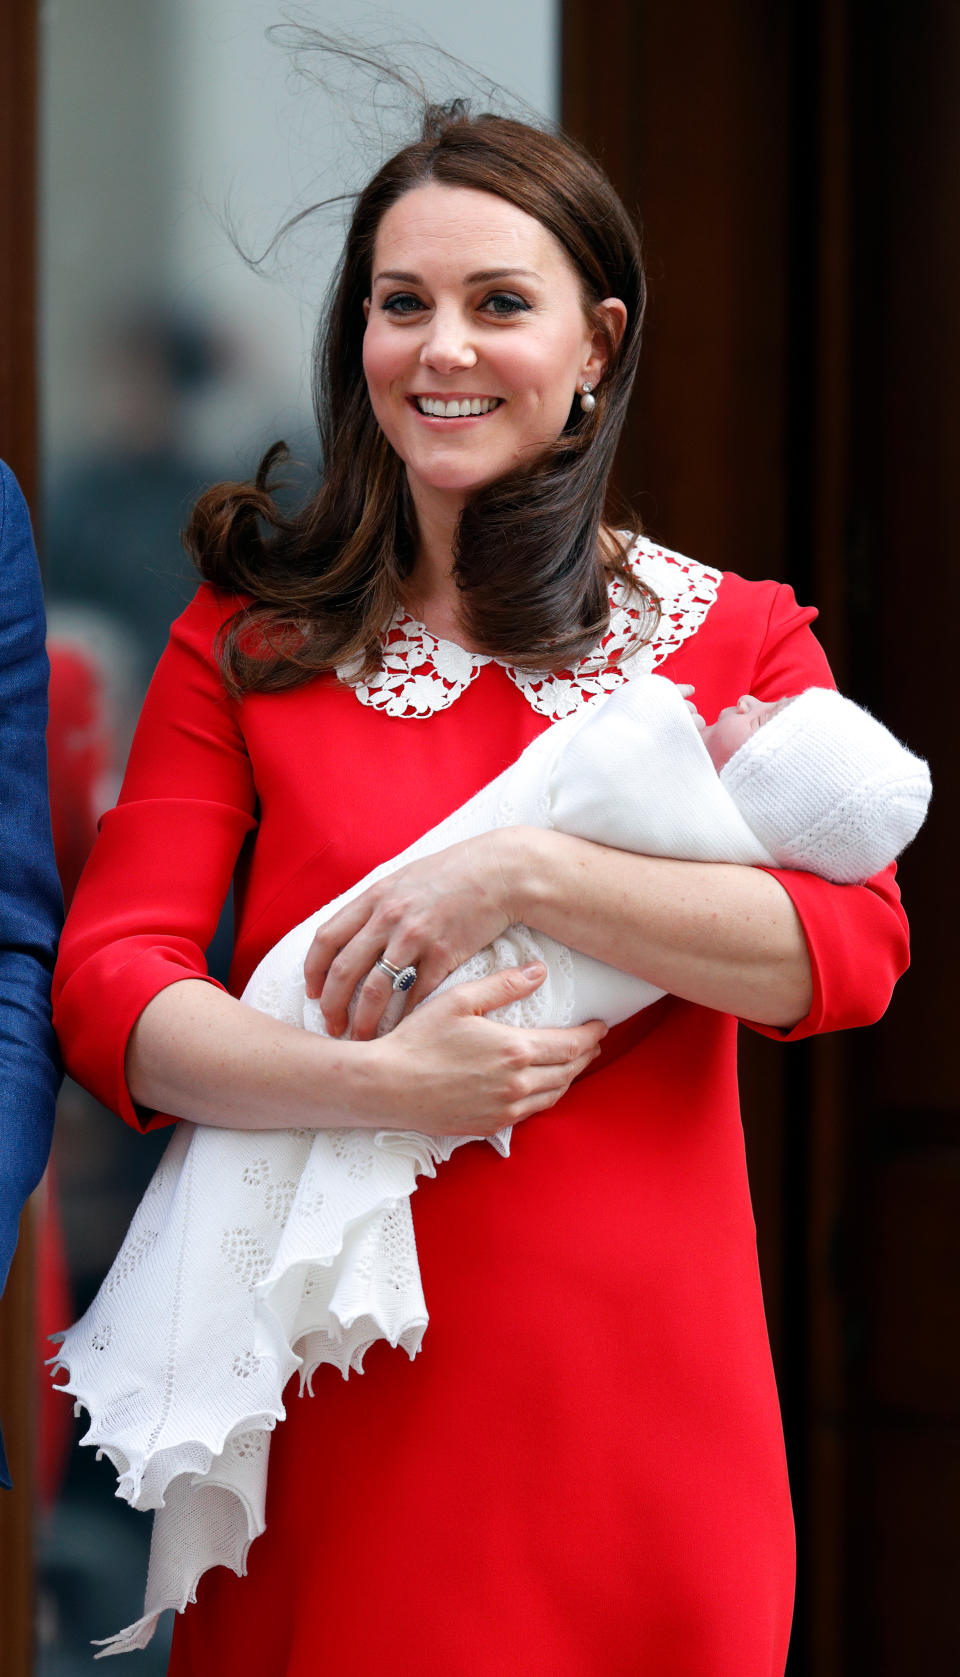 LONDON, UNITED KINGDOM - APRIL 23: (EMBARGOED FOR PUBLICATION IN UK NEWSPAPERS UNTIL 24 HOURS AFTER CREATE DATE AND TIME) Catherine, Duchess of Cambridge departs the Lindo Wing of St Mary's Hospital with her newborn baby son on April 23, 2018 in London, England. The Duchess delivered a boy at 11:01 am, weighing 8lbs 7oz, who will be fifth in line to the throne. (Photo by Max Mumby/Indigo/Getty Images)